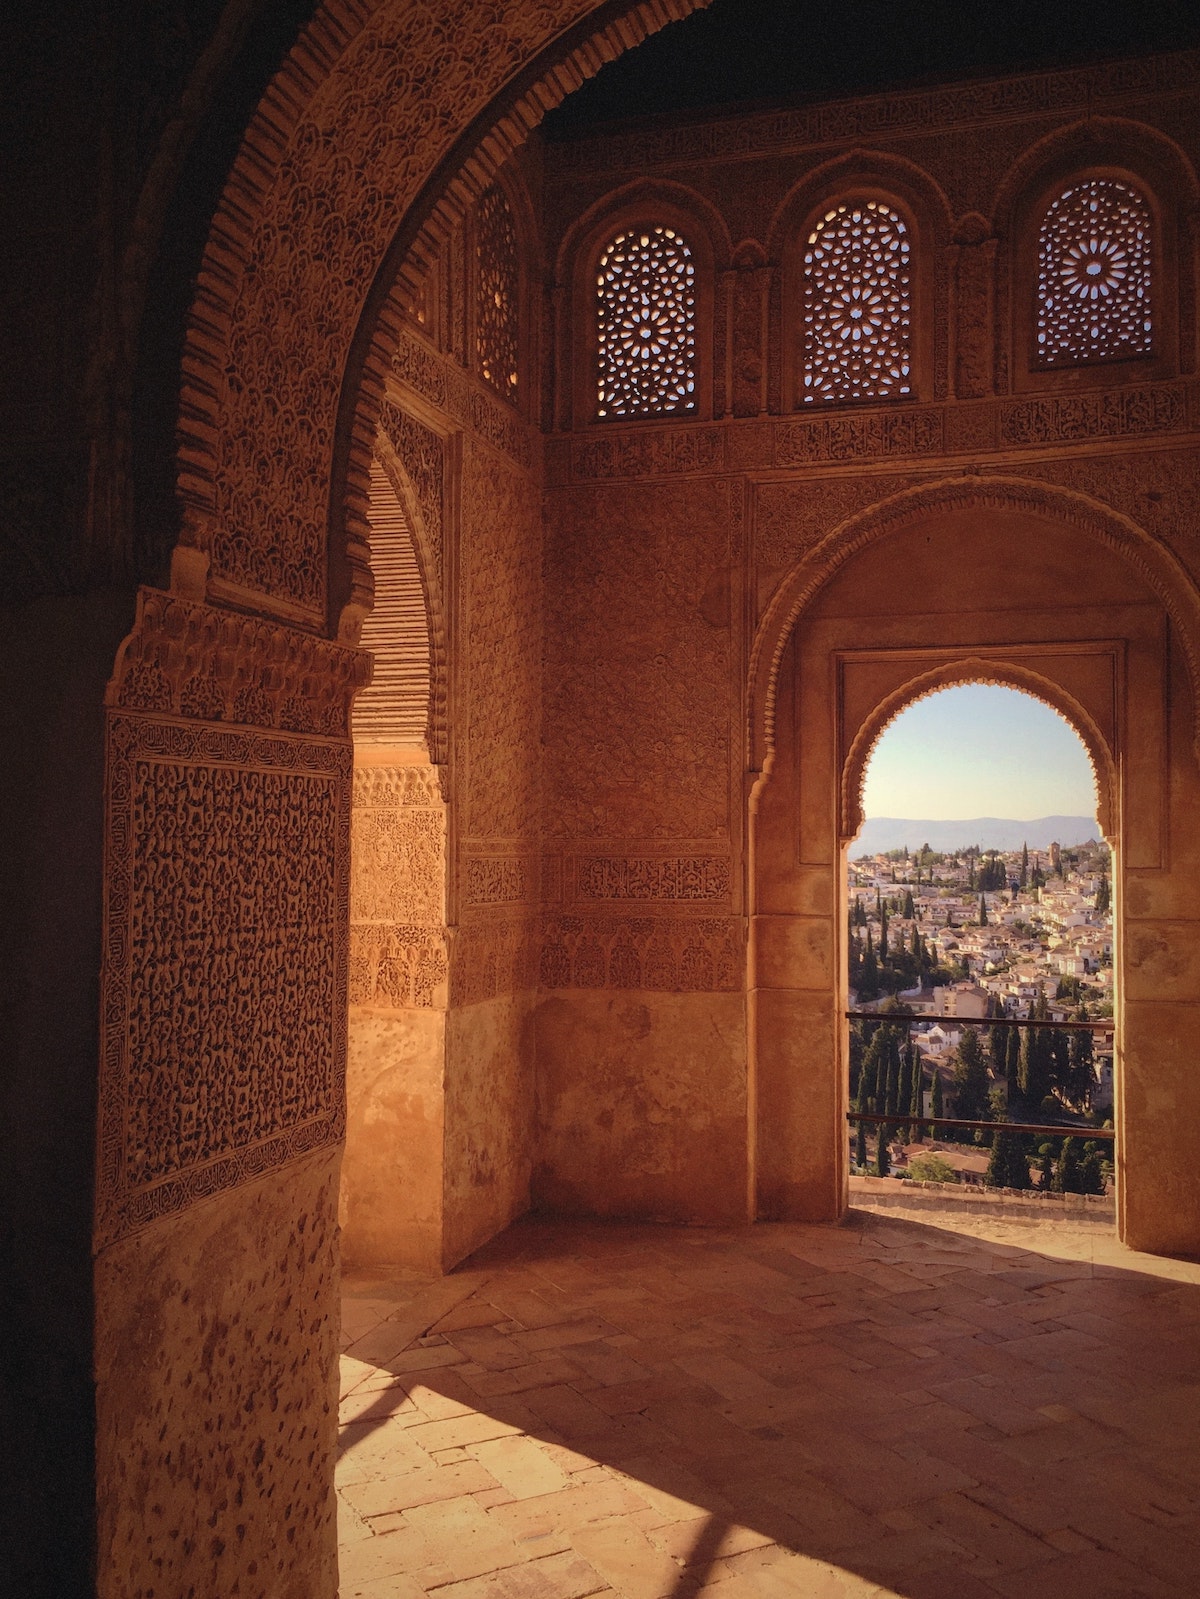 Moorish-style architecture featuring an arched window with a city visible in the distance